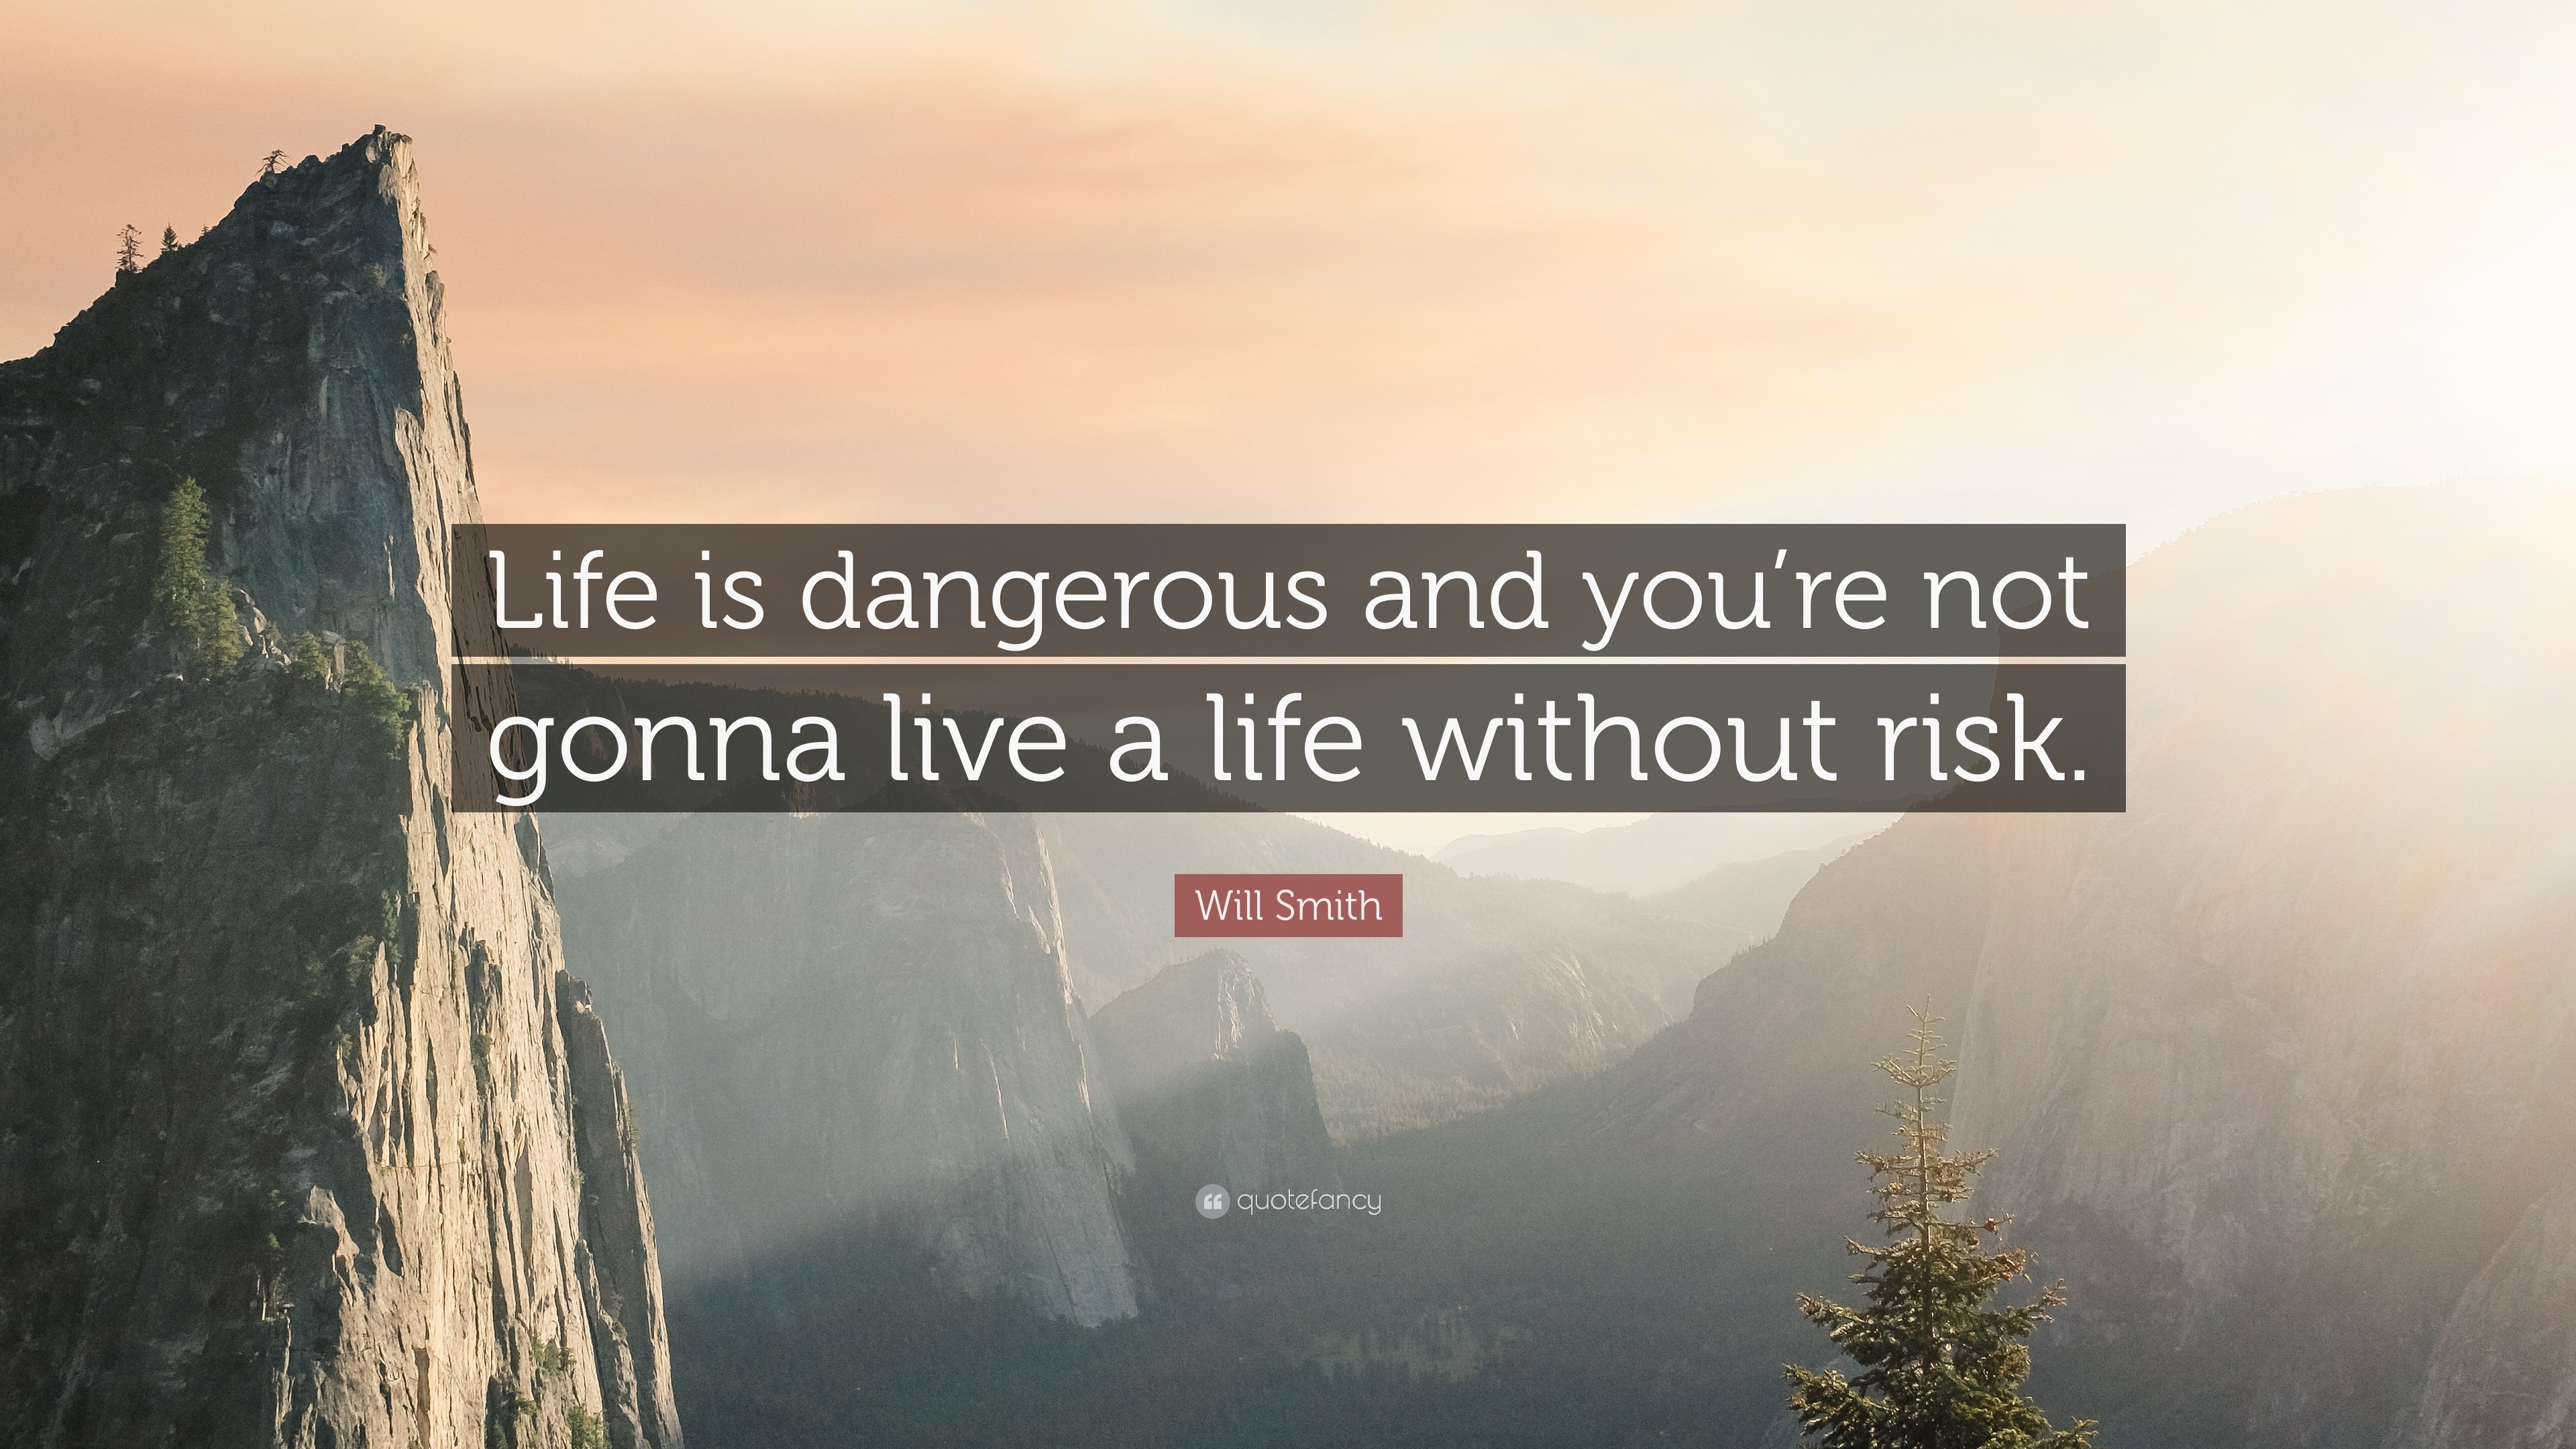 Will Smith Quote “Life is dangerous and you re not gonna live a